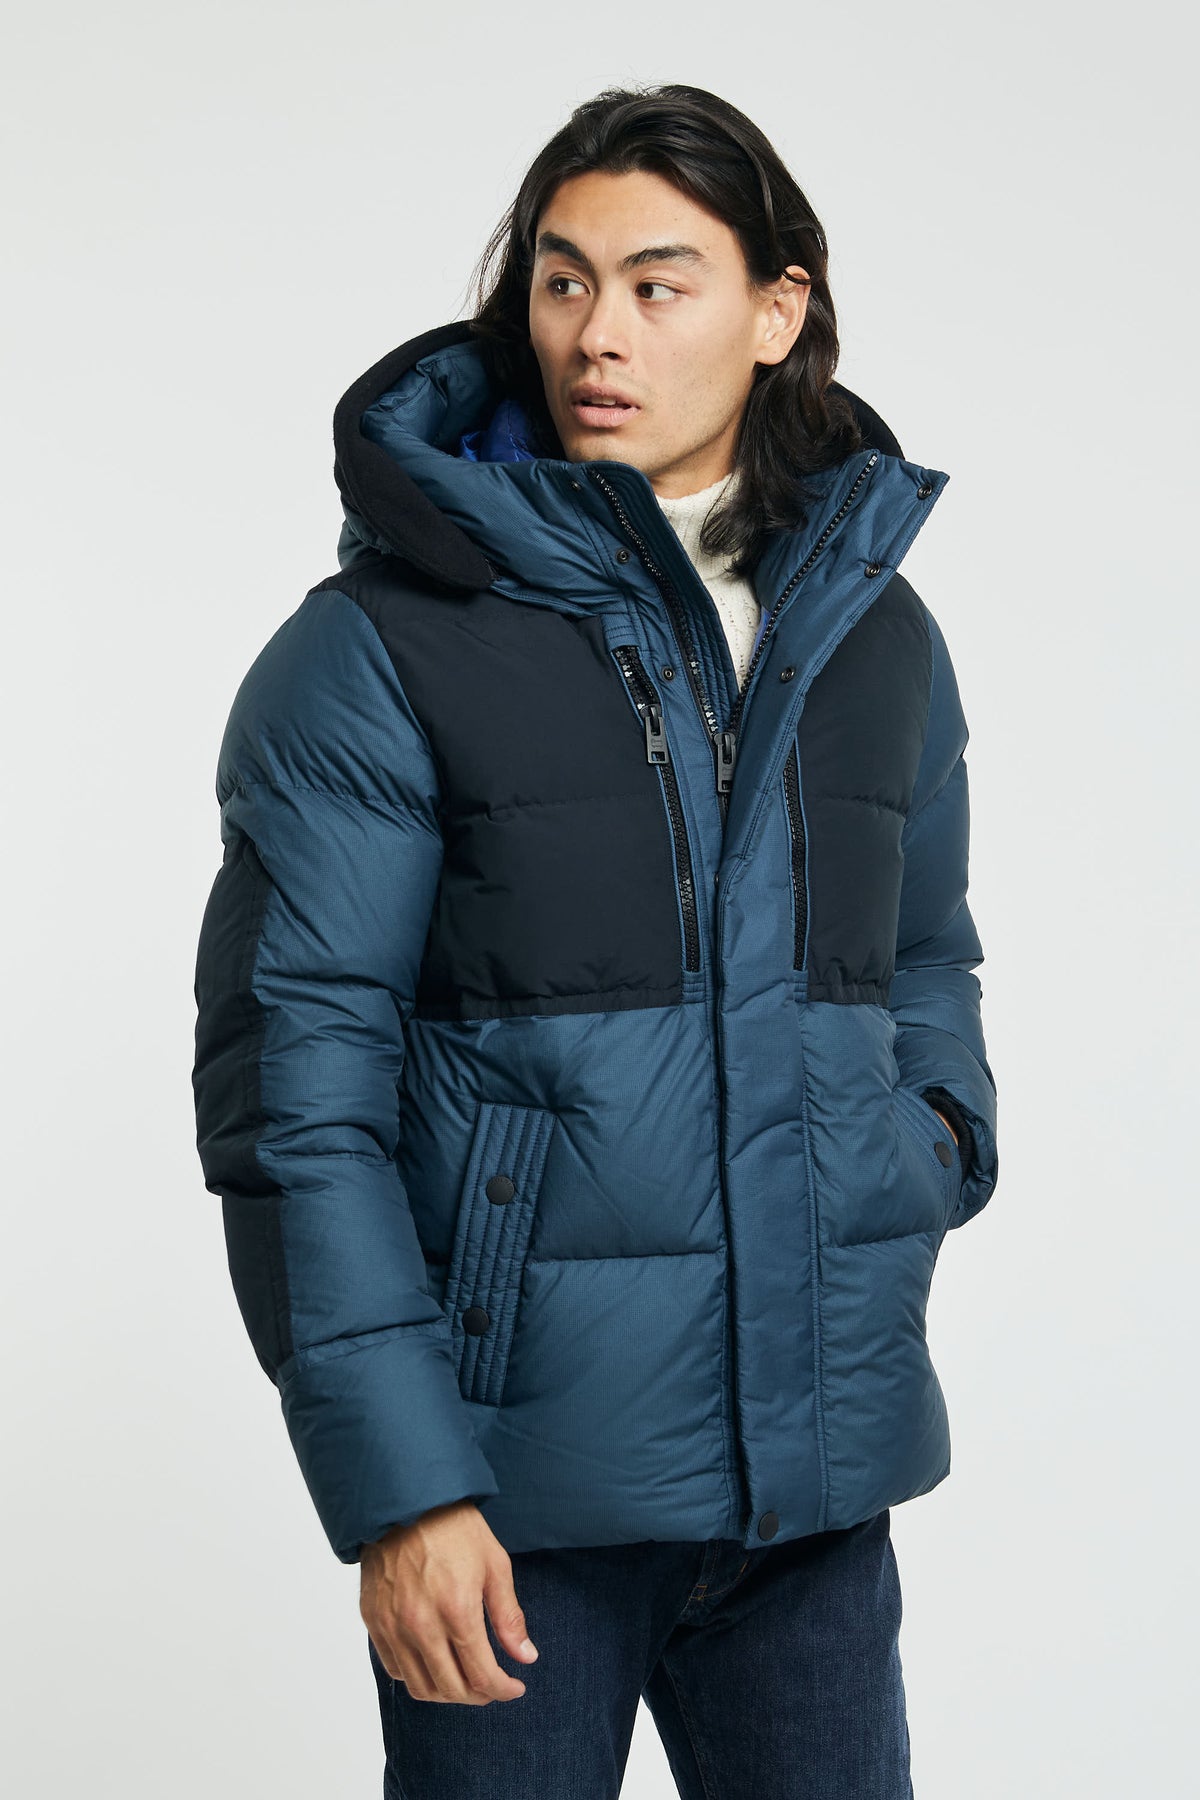 Woolrich Blue Jacket in Nylon and Cotton